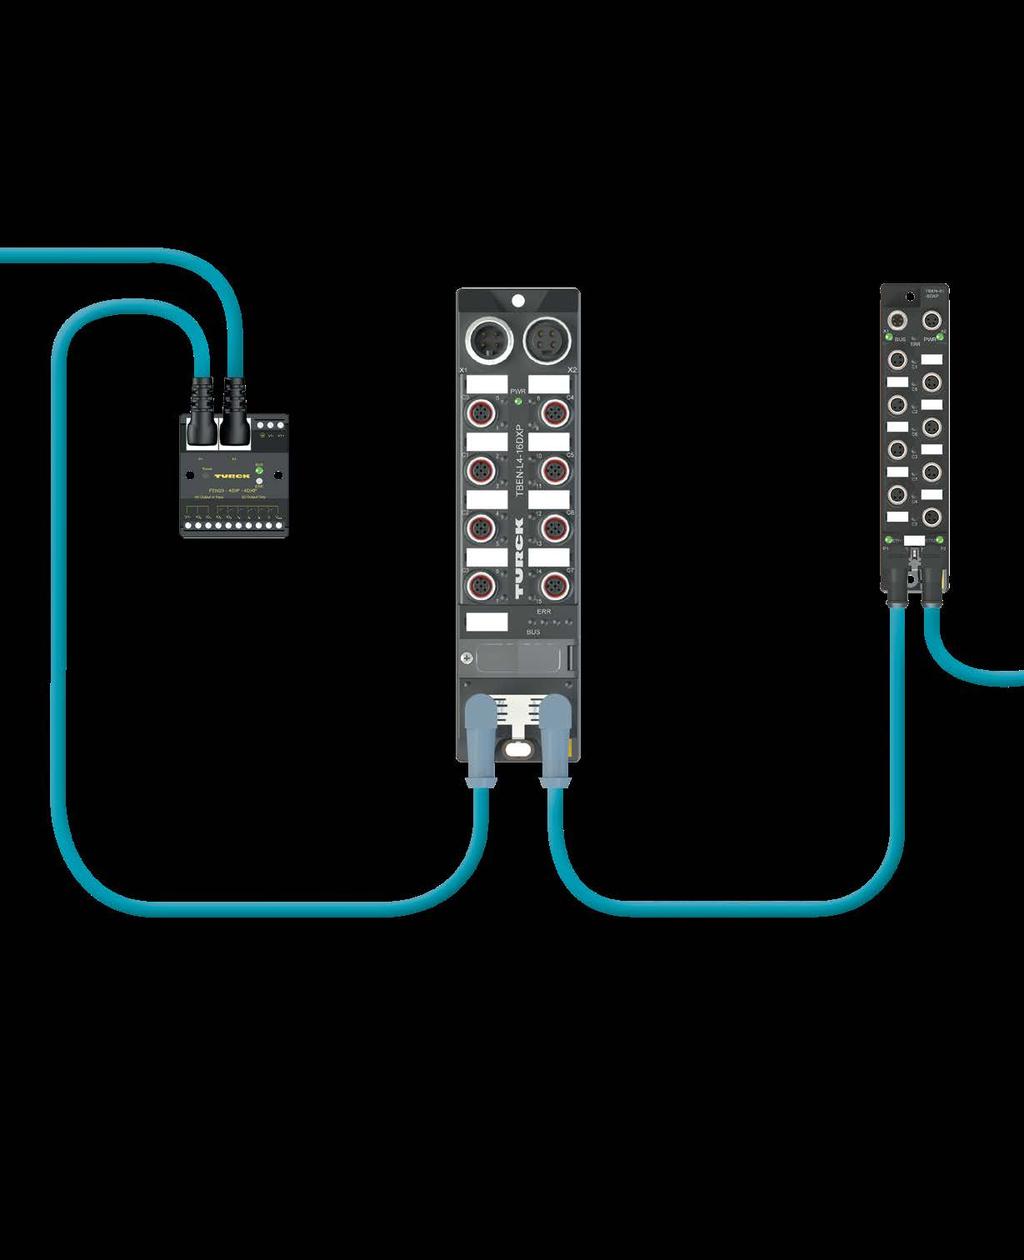 NDUSTRIAL ETHERNE FEN20: In-Cabinet Block I/O Available in a variety of I/O channels Universal I/O option - each channel can be an input or output IP20 rated for in-cabinet, fixed I/O applications 3